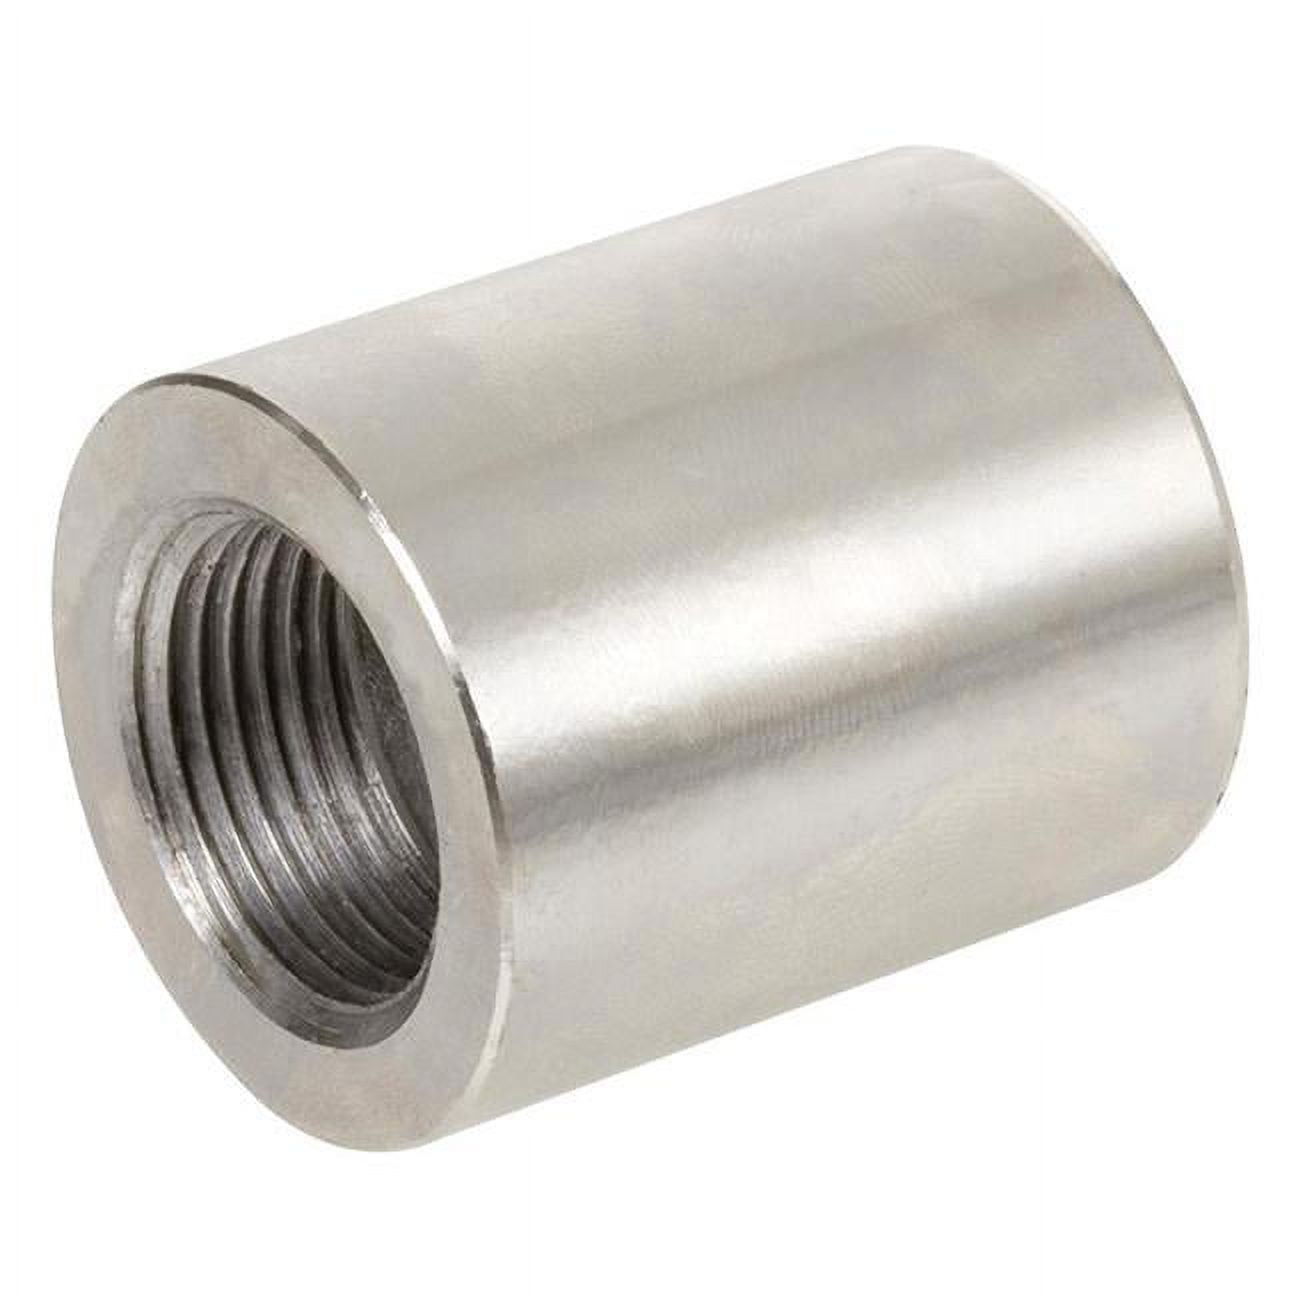 4810644 Stainless Steel Reducing Coupling - 1 In. X 0.75 Dia.